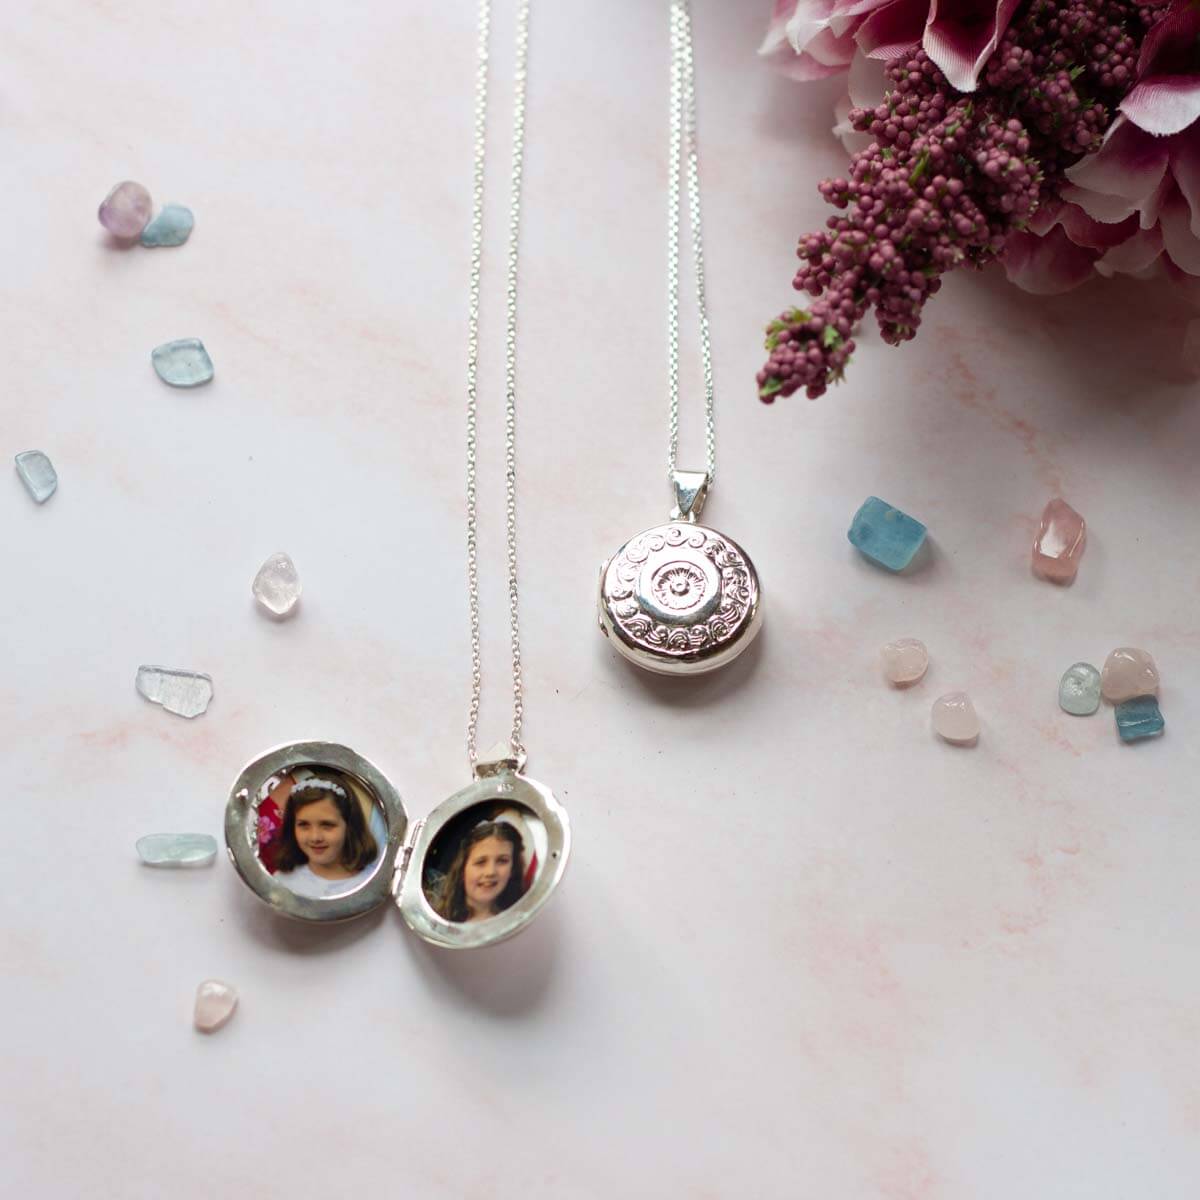 large silver locket open showing two photos.